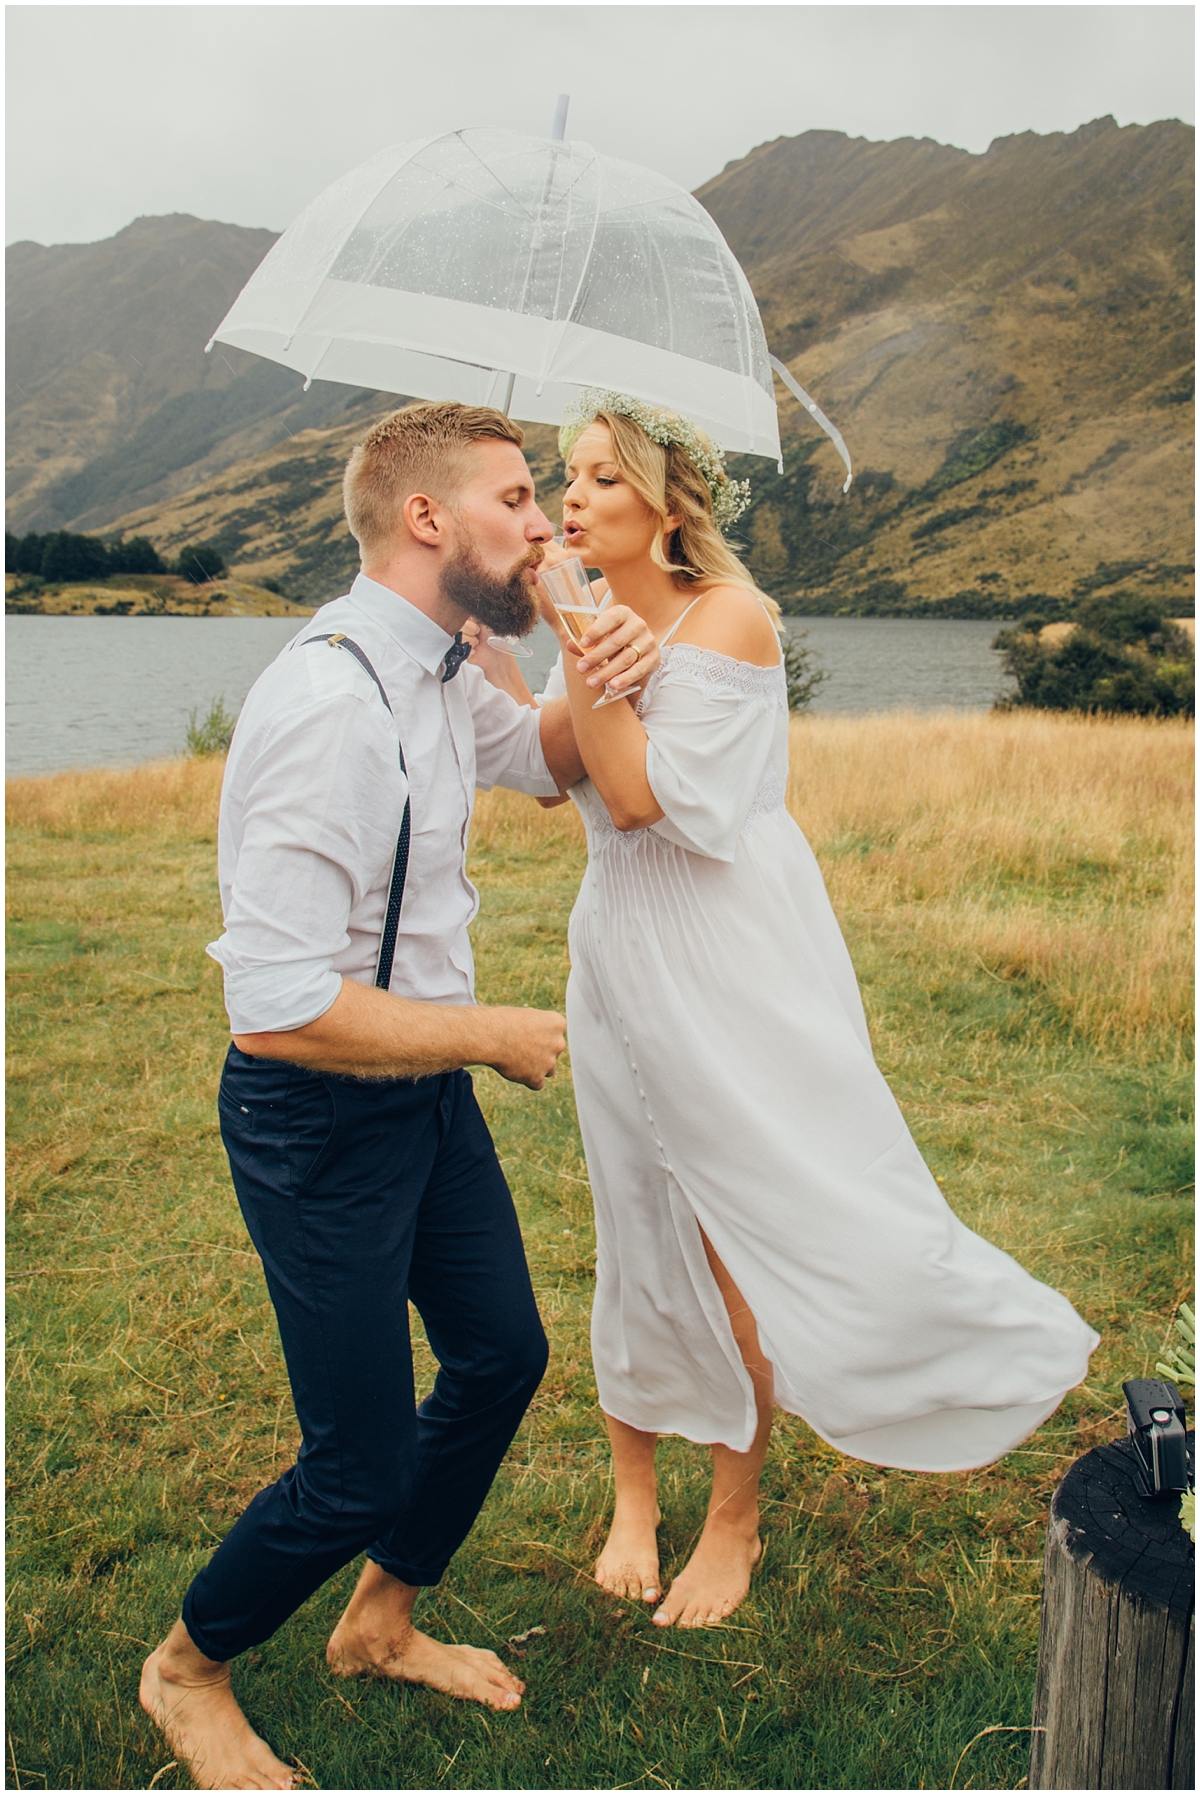 Bride and groom drink champagne under an umbrella